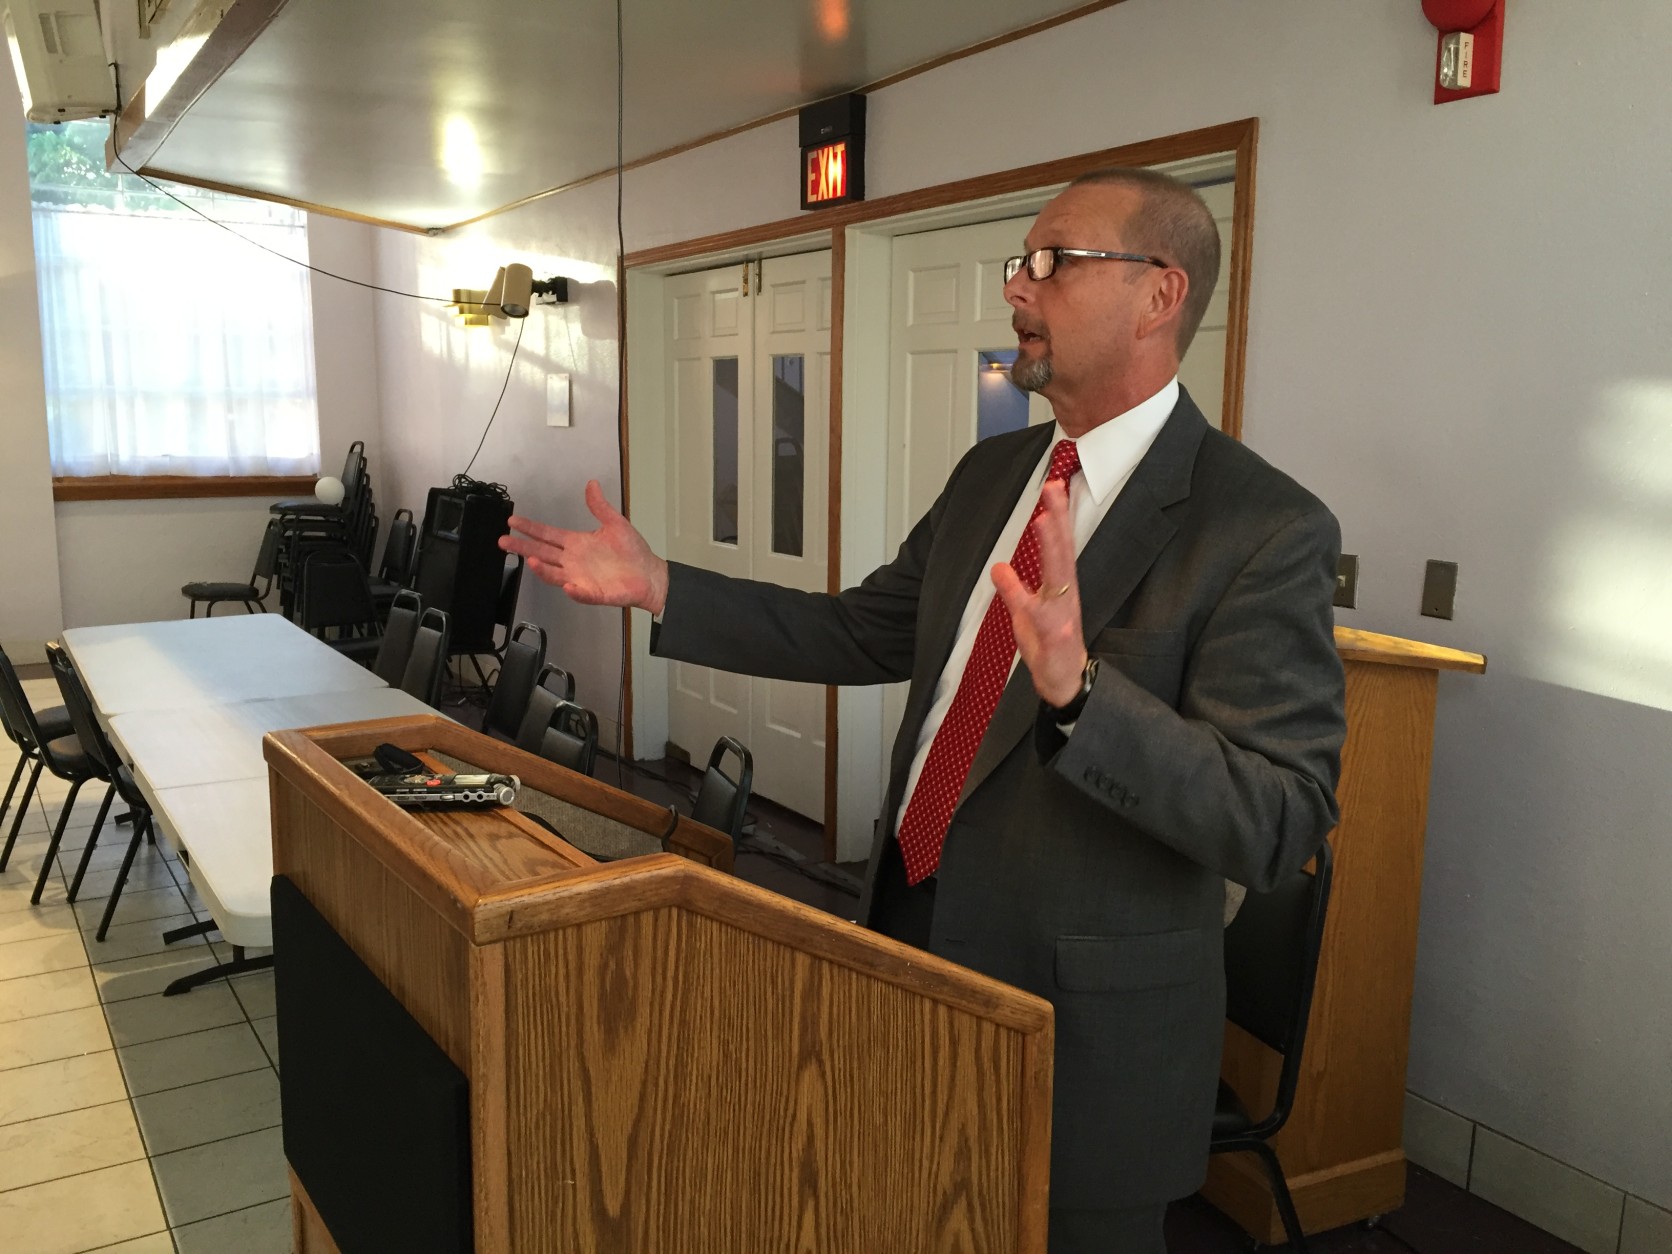 Rob Doolittle with CSX spoke at a meeting in Northeast on May 16, 2016, about the freight train derailment that happened near the Rhode Island Avenue Metro station just over two weeks ago. (WTOP/Michelle Basch)